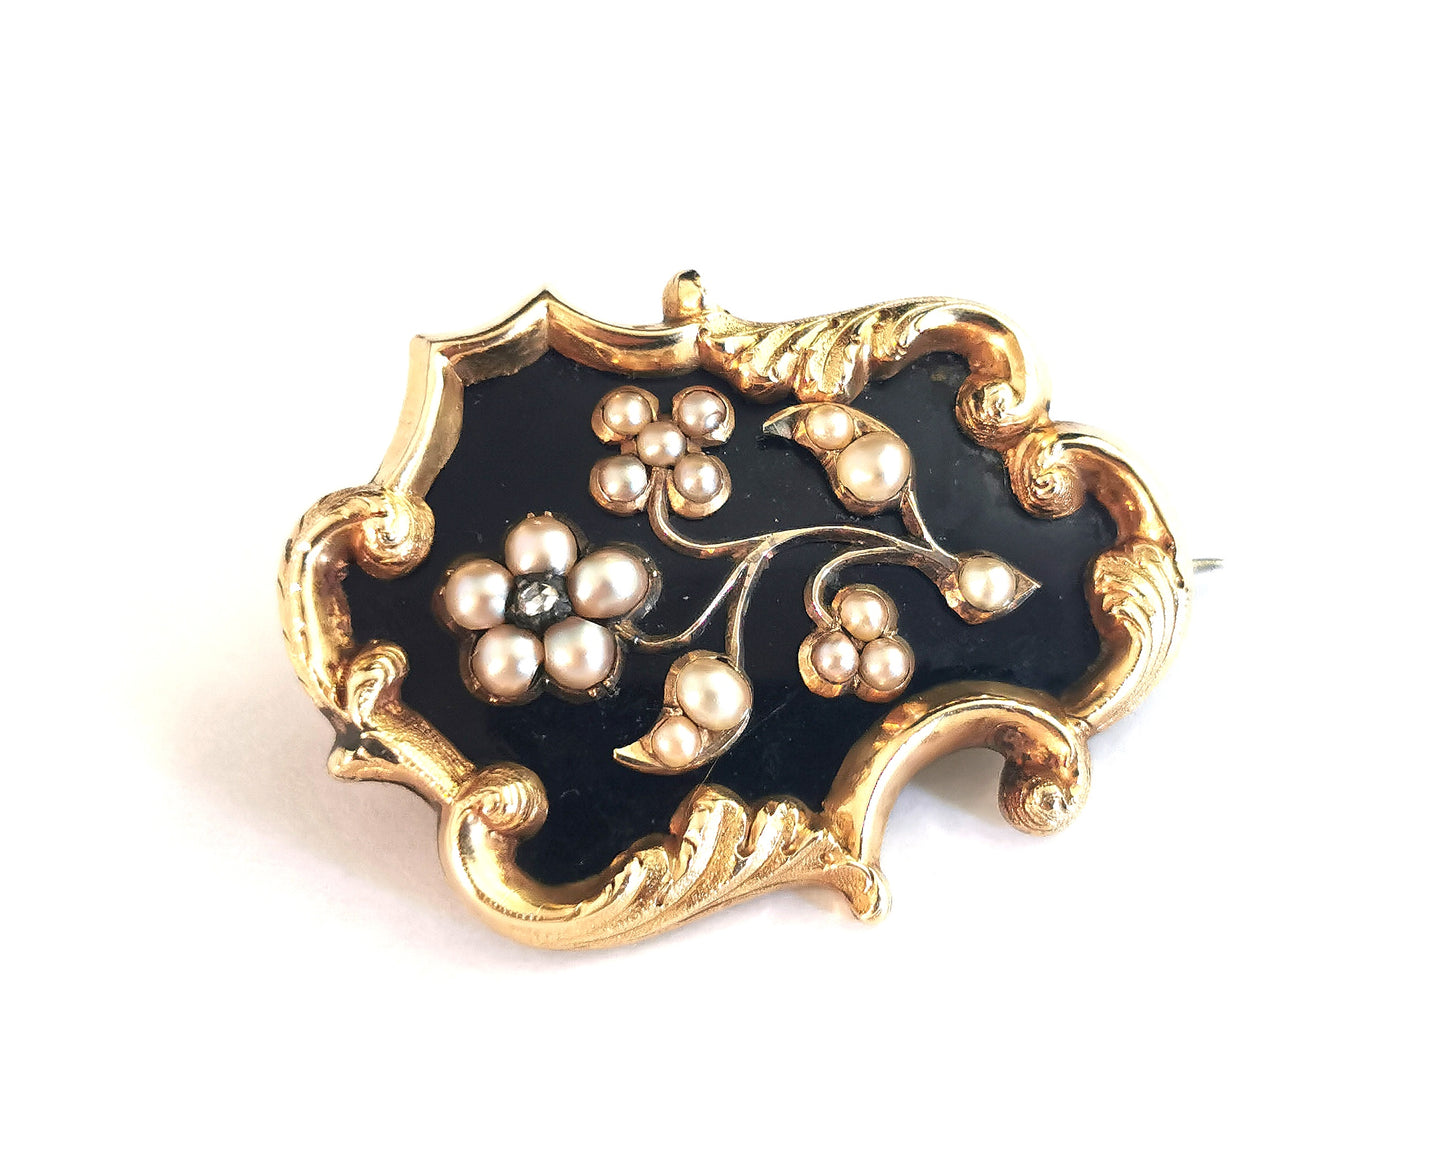 Antique Victorian mourning brooch, Pearl, Diamond and black enamel, Forget me not flower